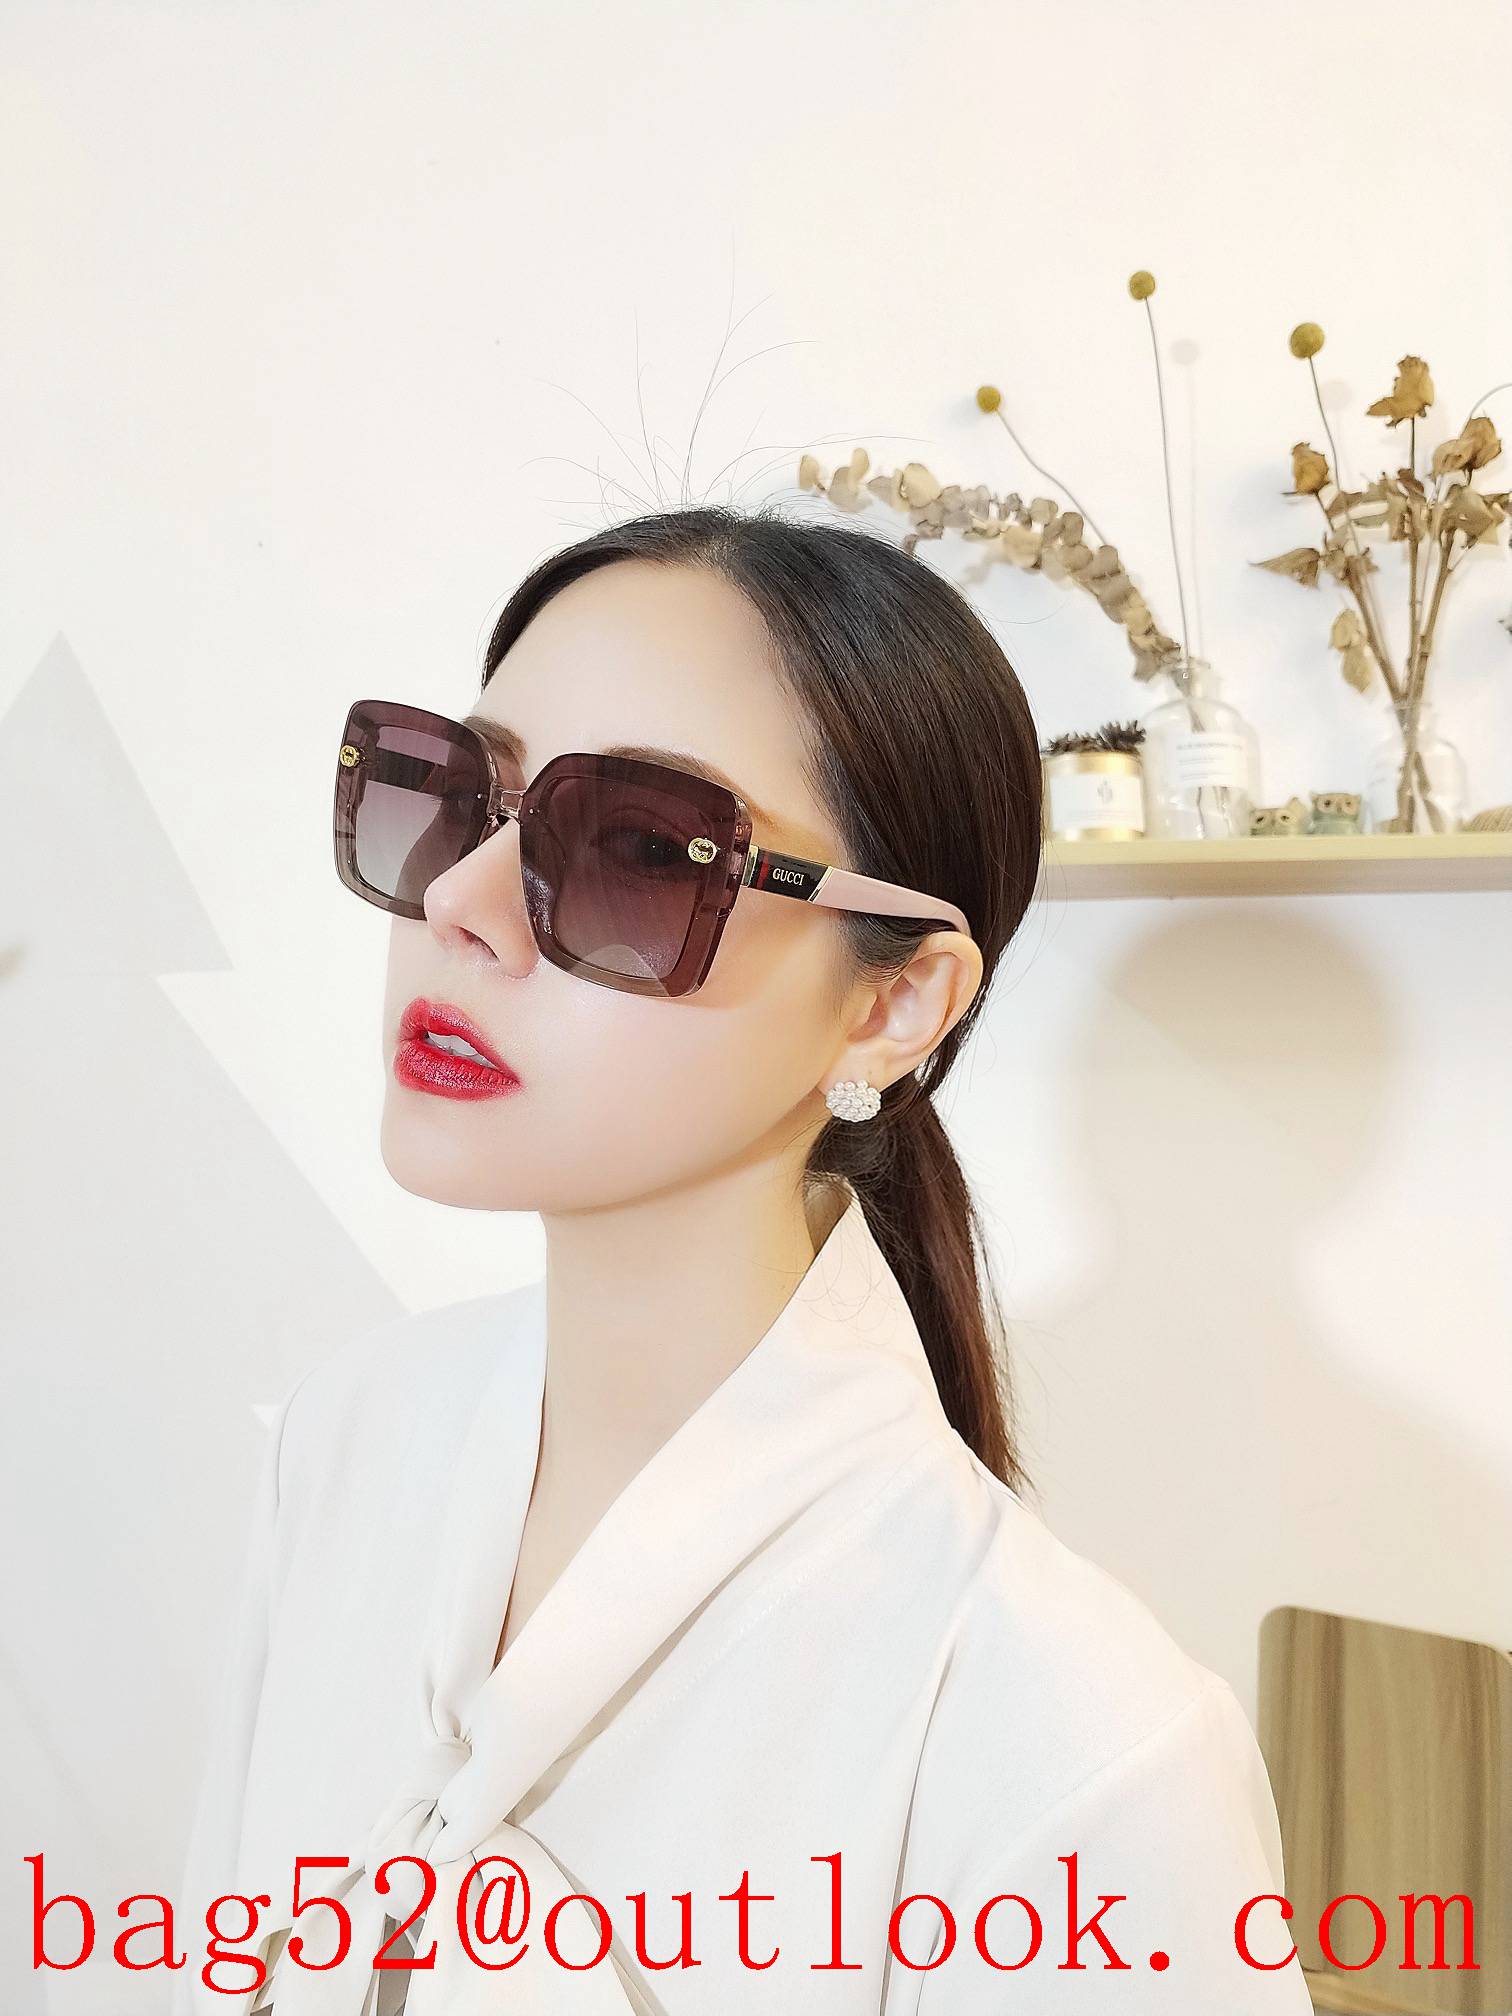 Gucci's new interpret the latest spring and summer sunglasses